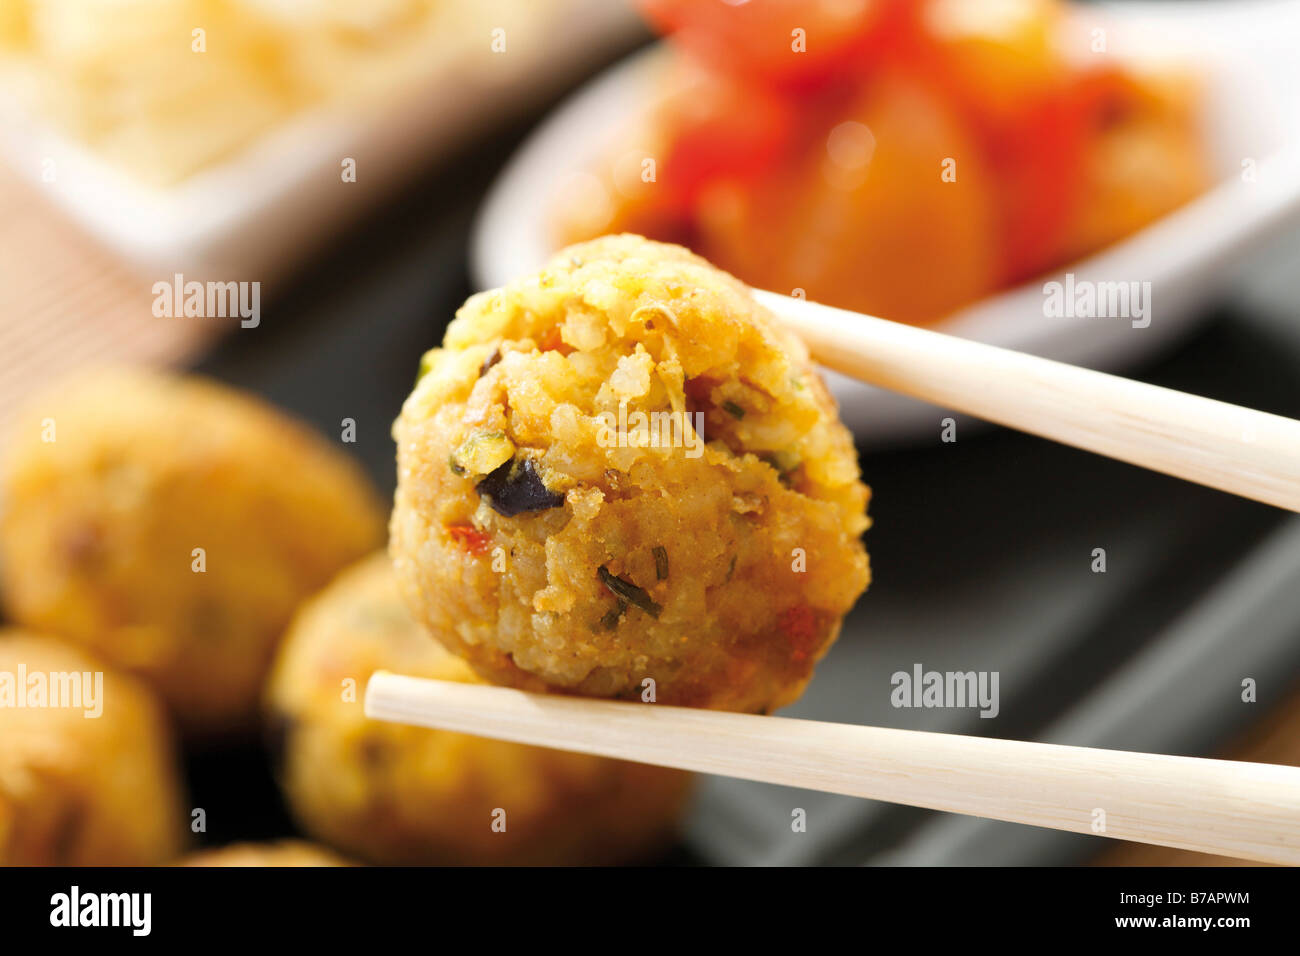 Asian, curry-flavoured ball of rice held with chopsticks, chicken breast with red peppers and noodles Stock Photo